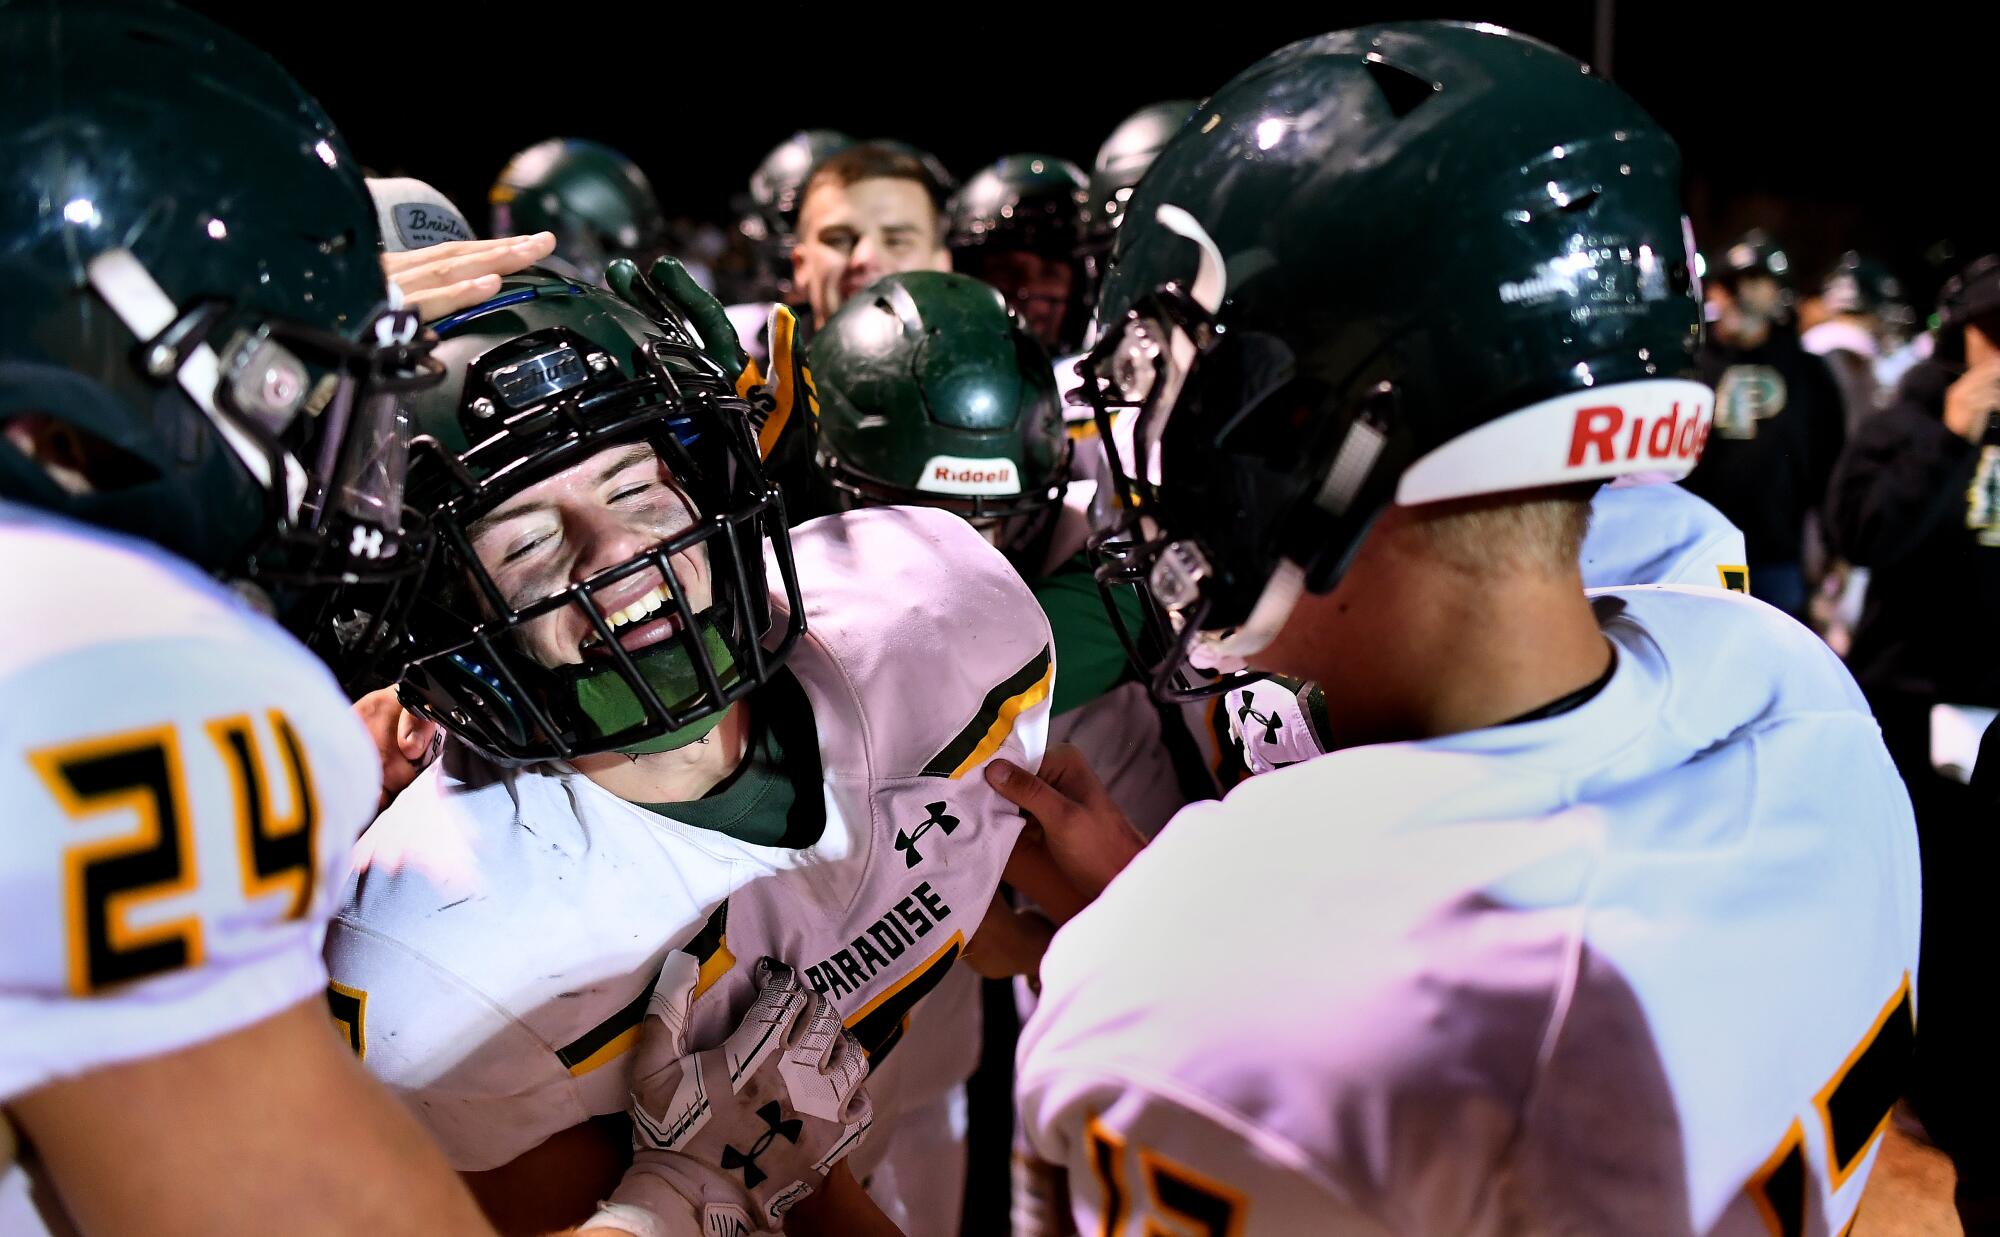 Paradise's Brenden Moon is congratulated by teammates after scoring a touchdown.